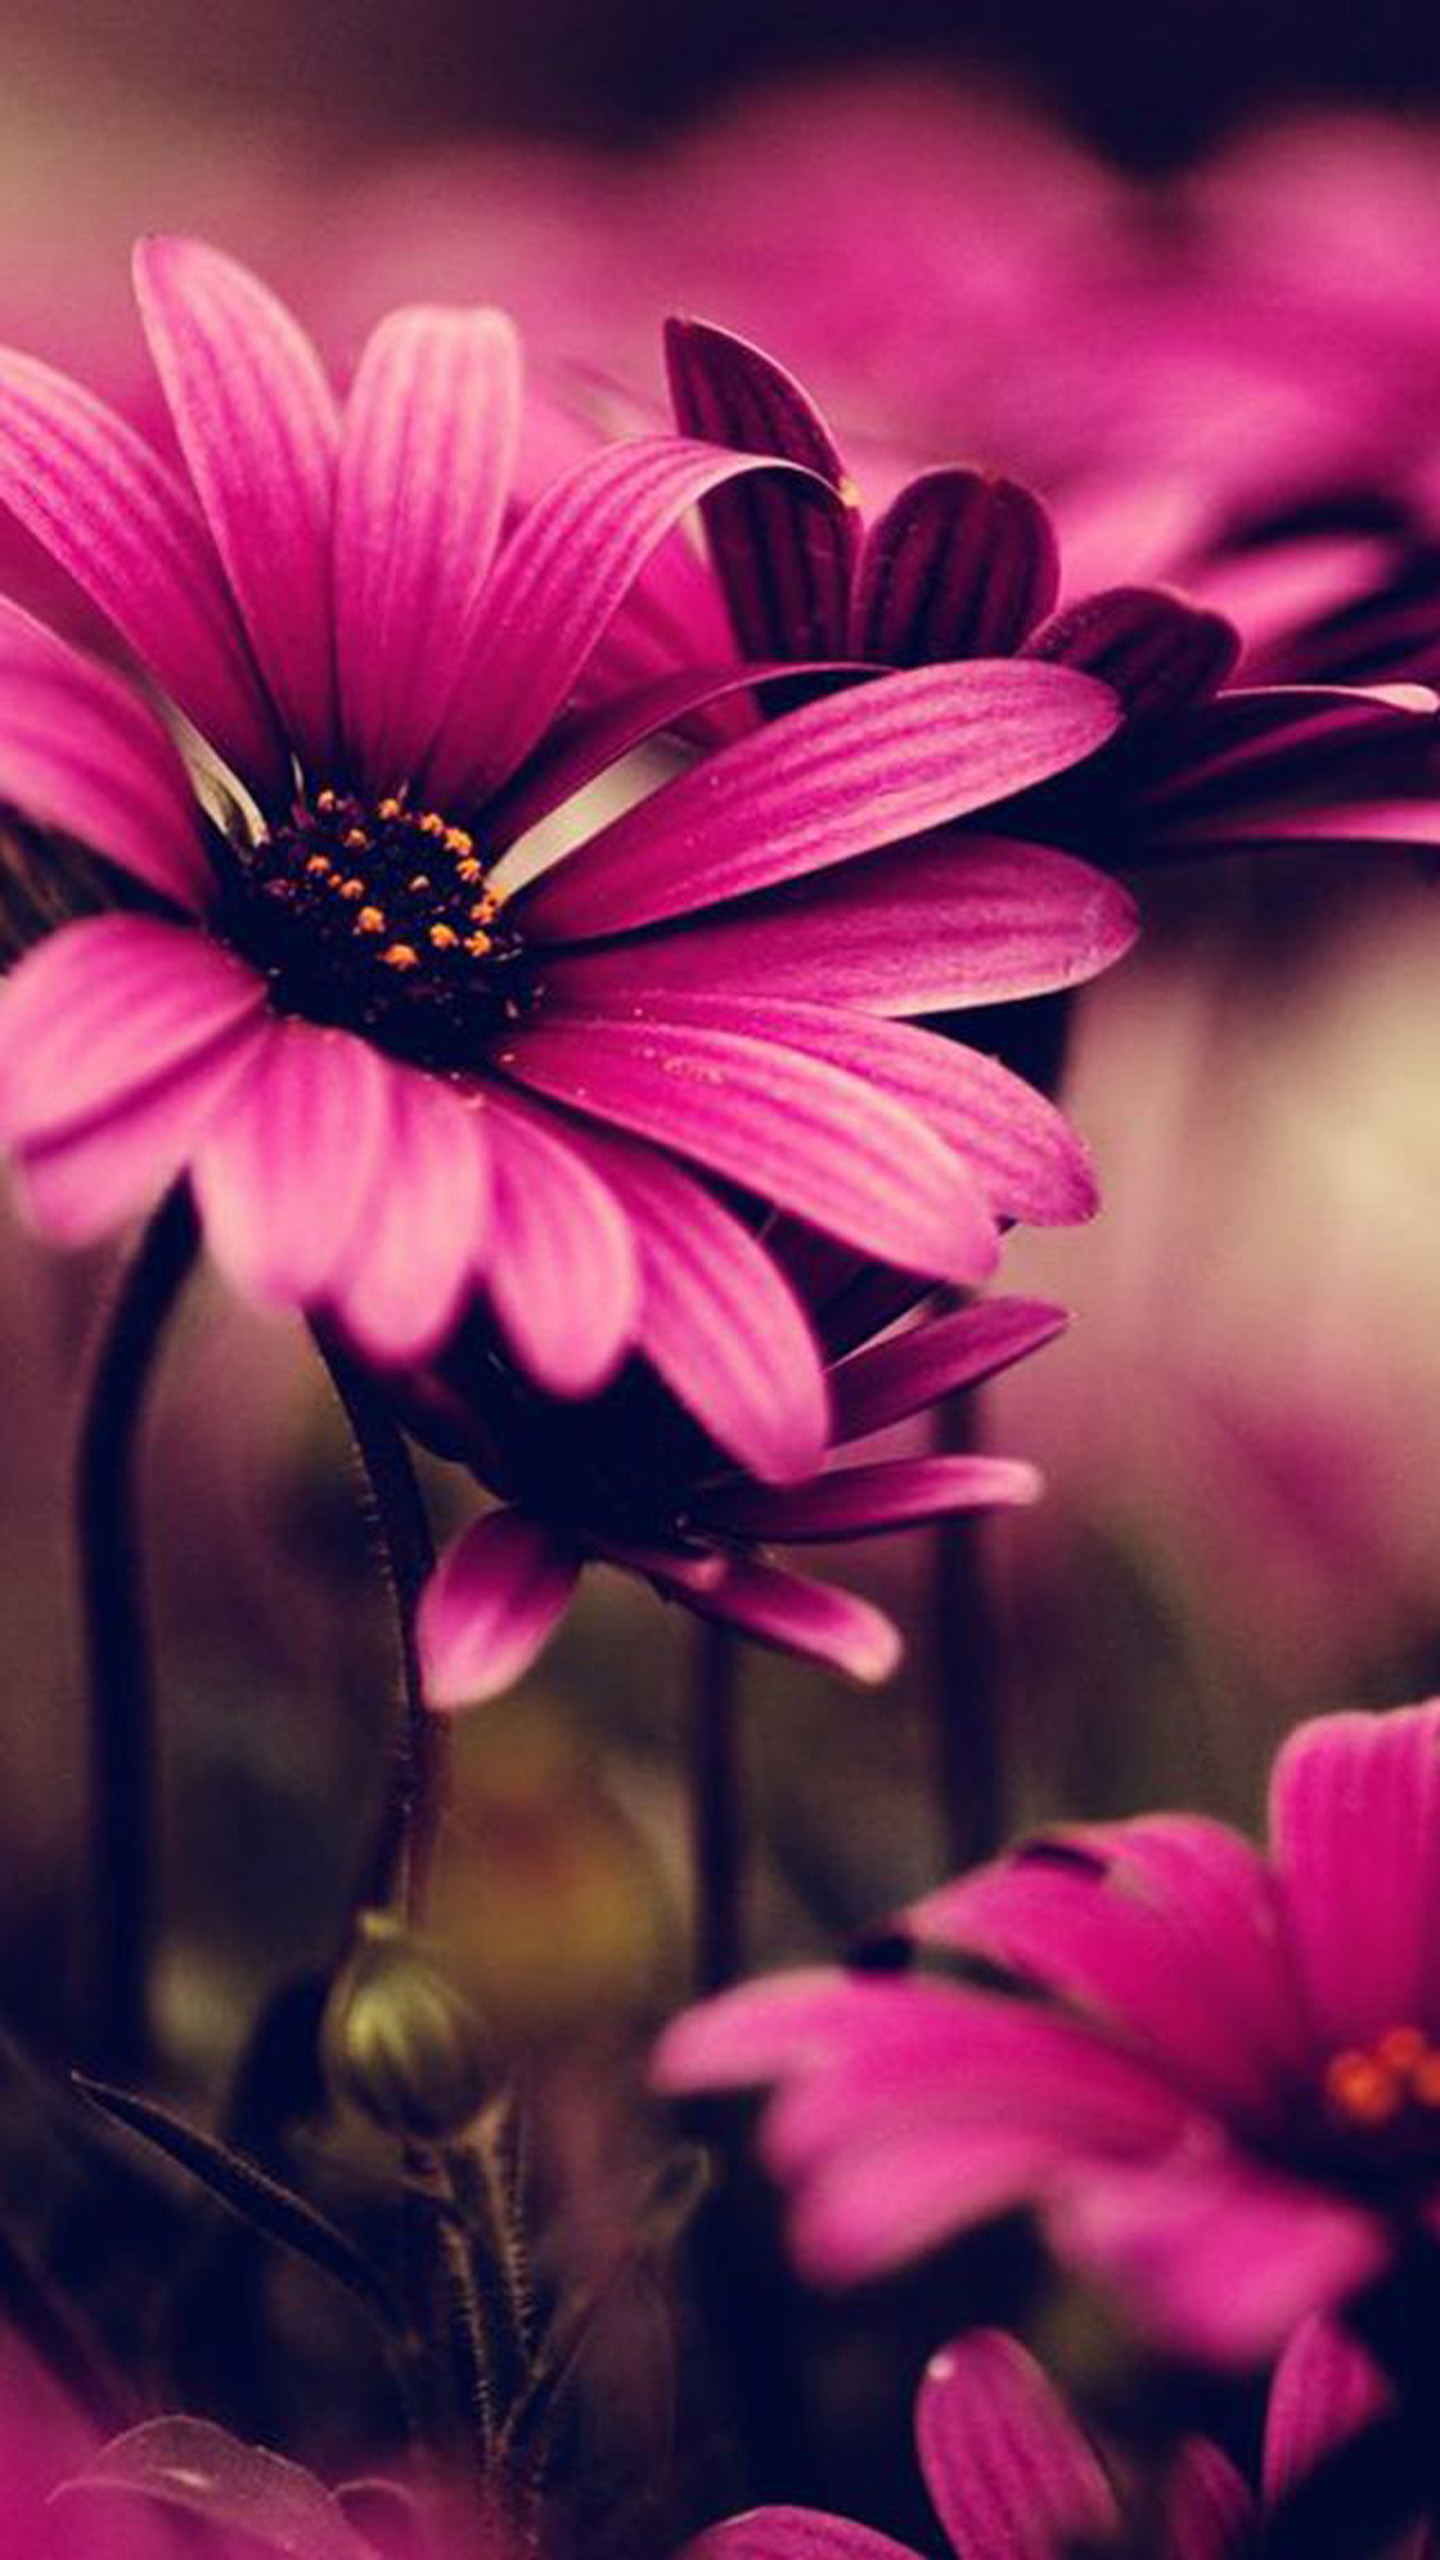 Free download Flower Samsung Galaxy S5 Wallpapers Part 12 [1440x2560] for your Desktop, Mobile